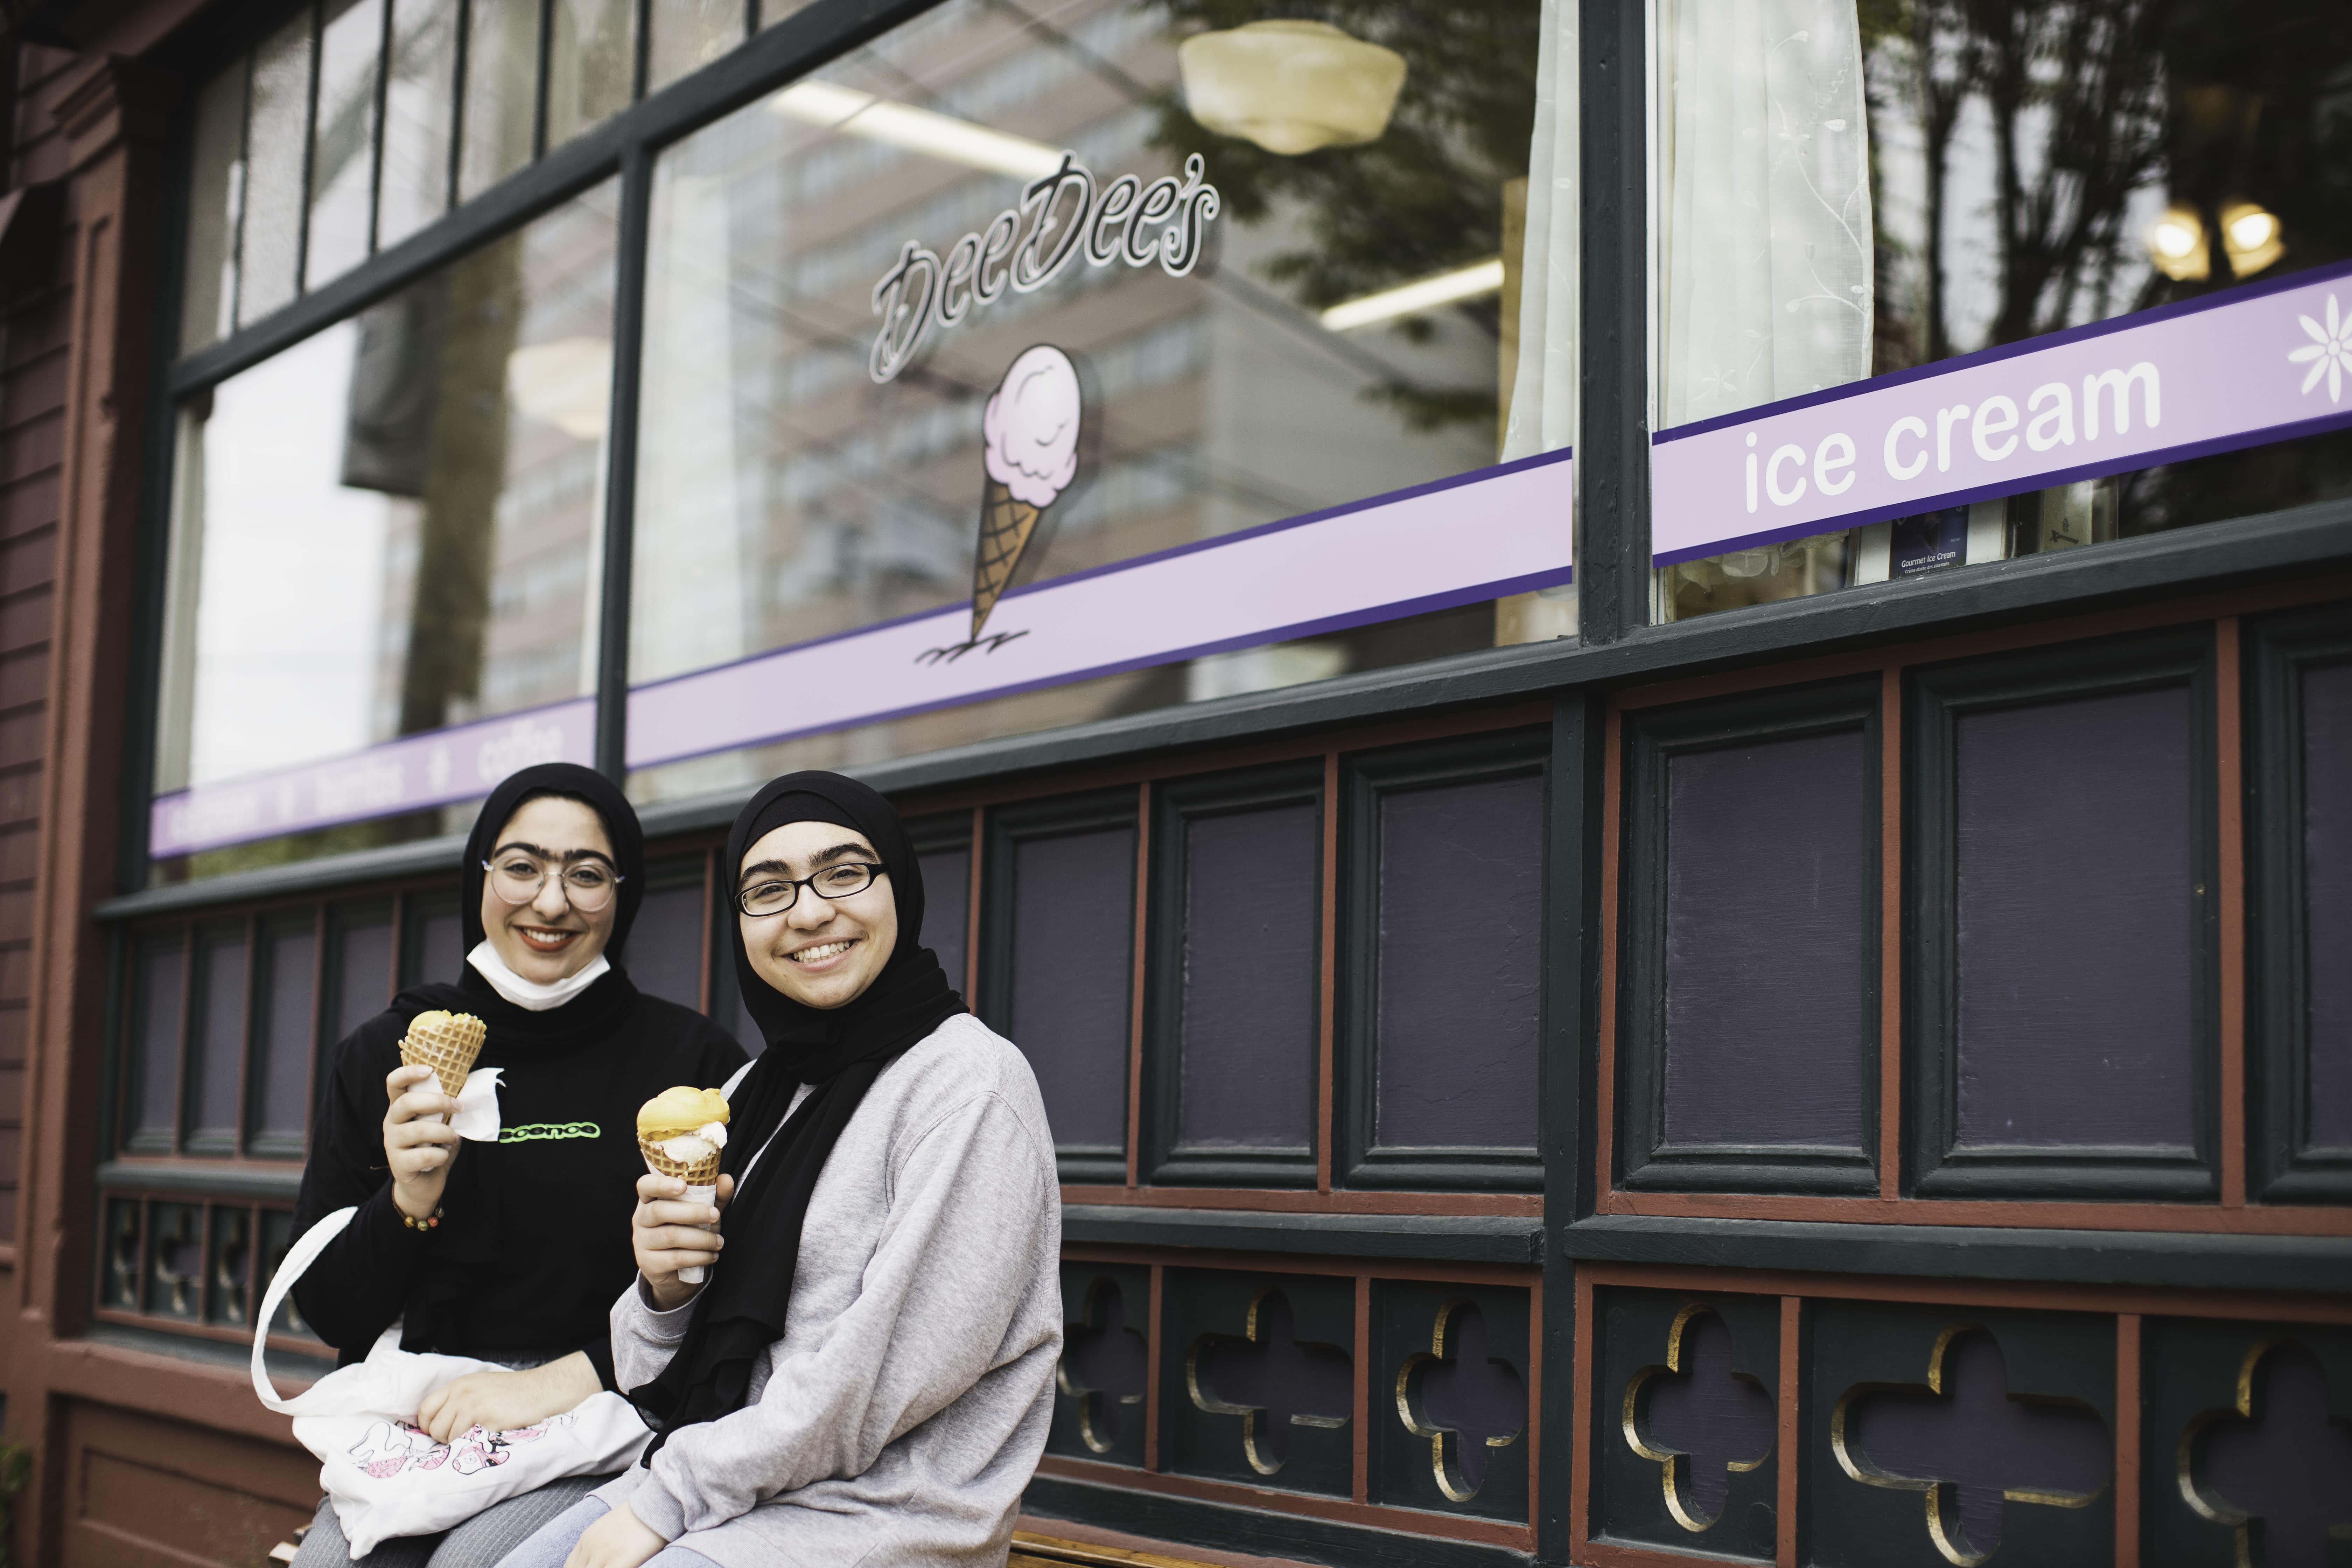 Pictured: two young women sitting outside DeeDee's ice cream shop in Halifax eating ice cream and smiling